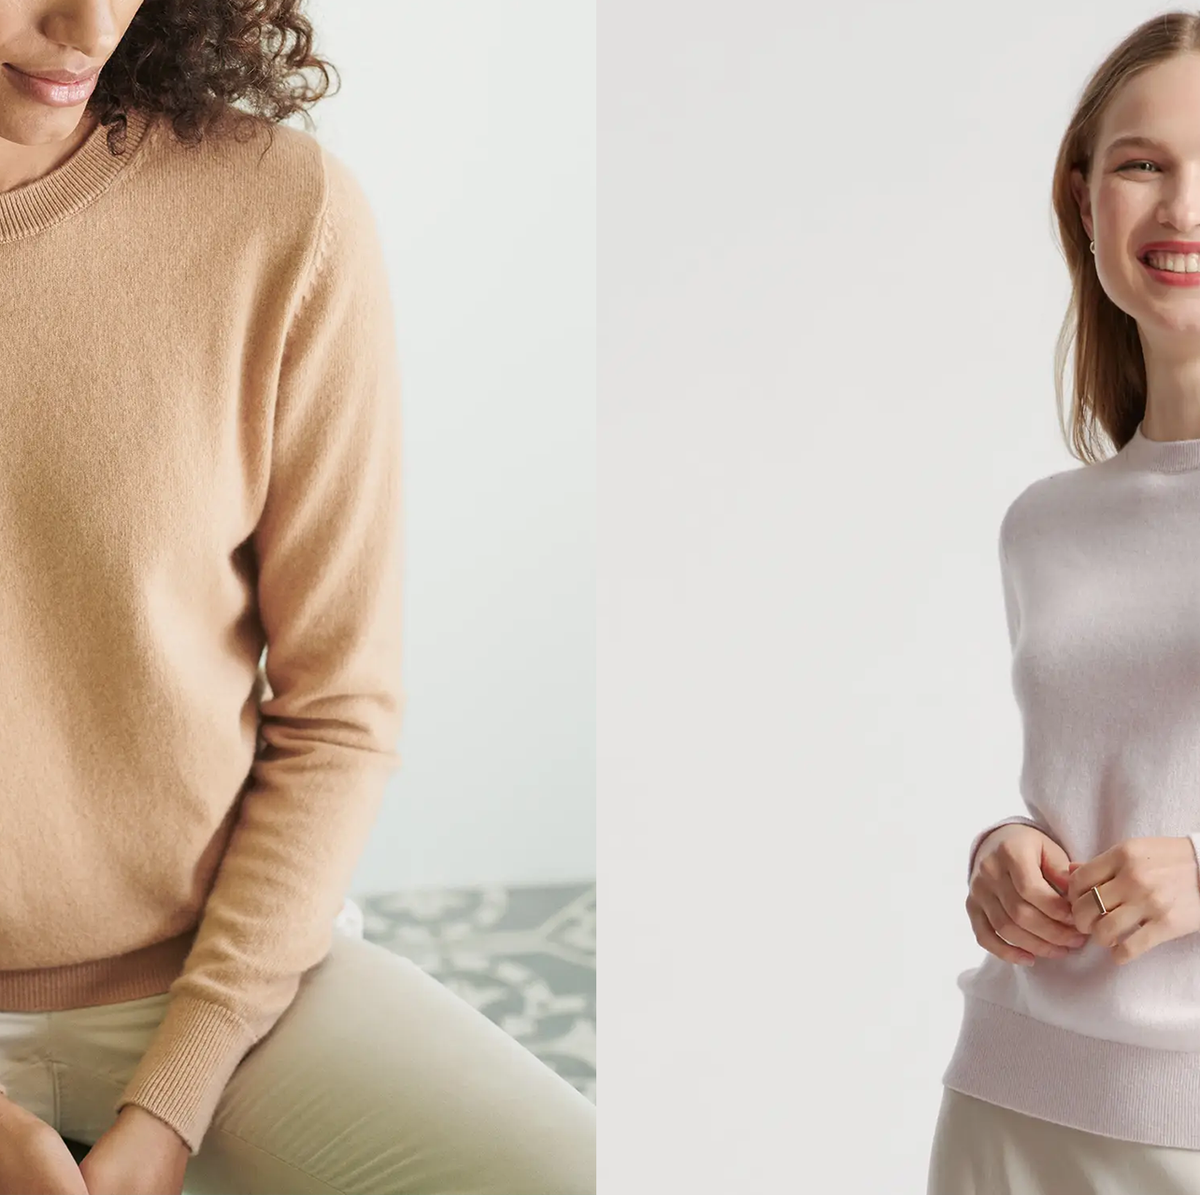 Quince's luxurious cashmere sweaters are only $50, so I'm stocking up -  Yahoo Sports